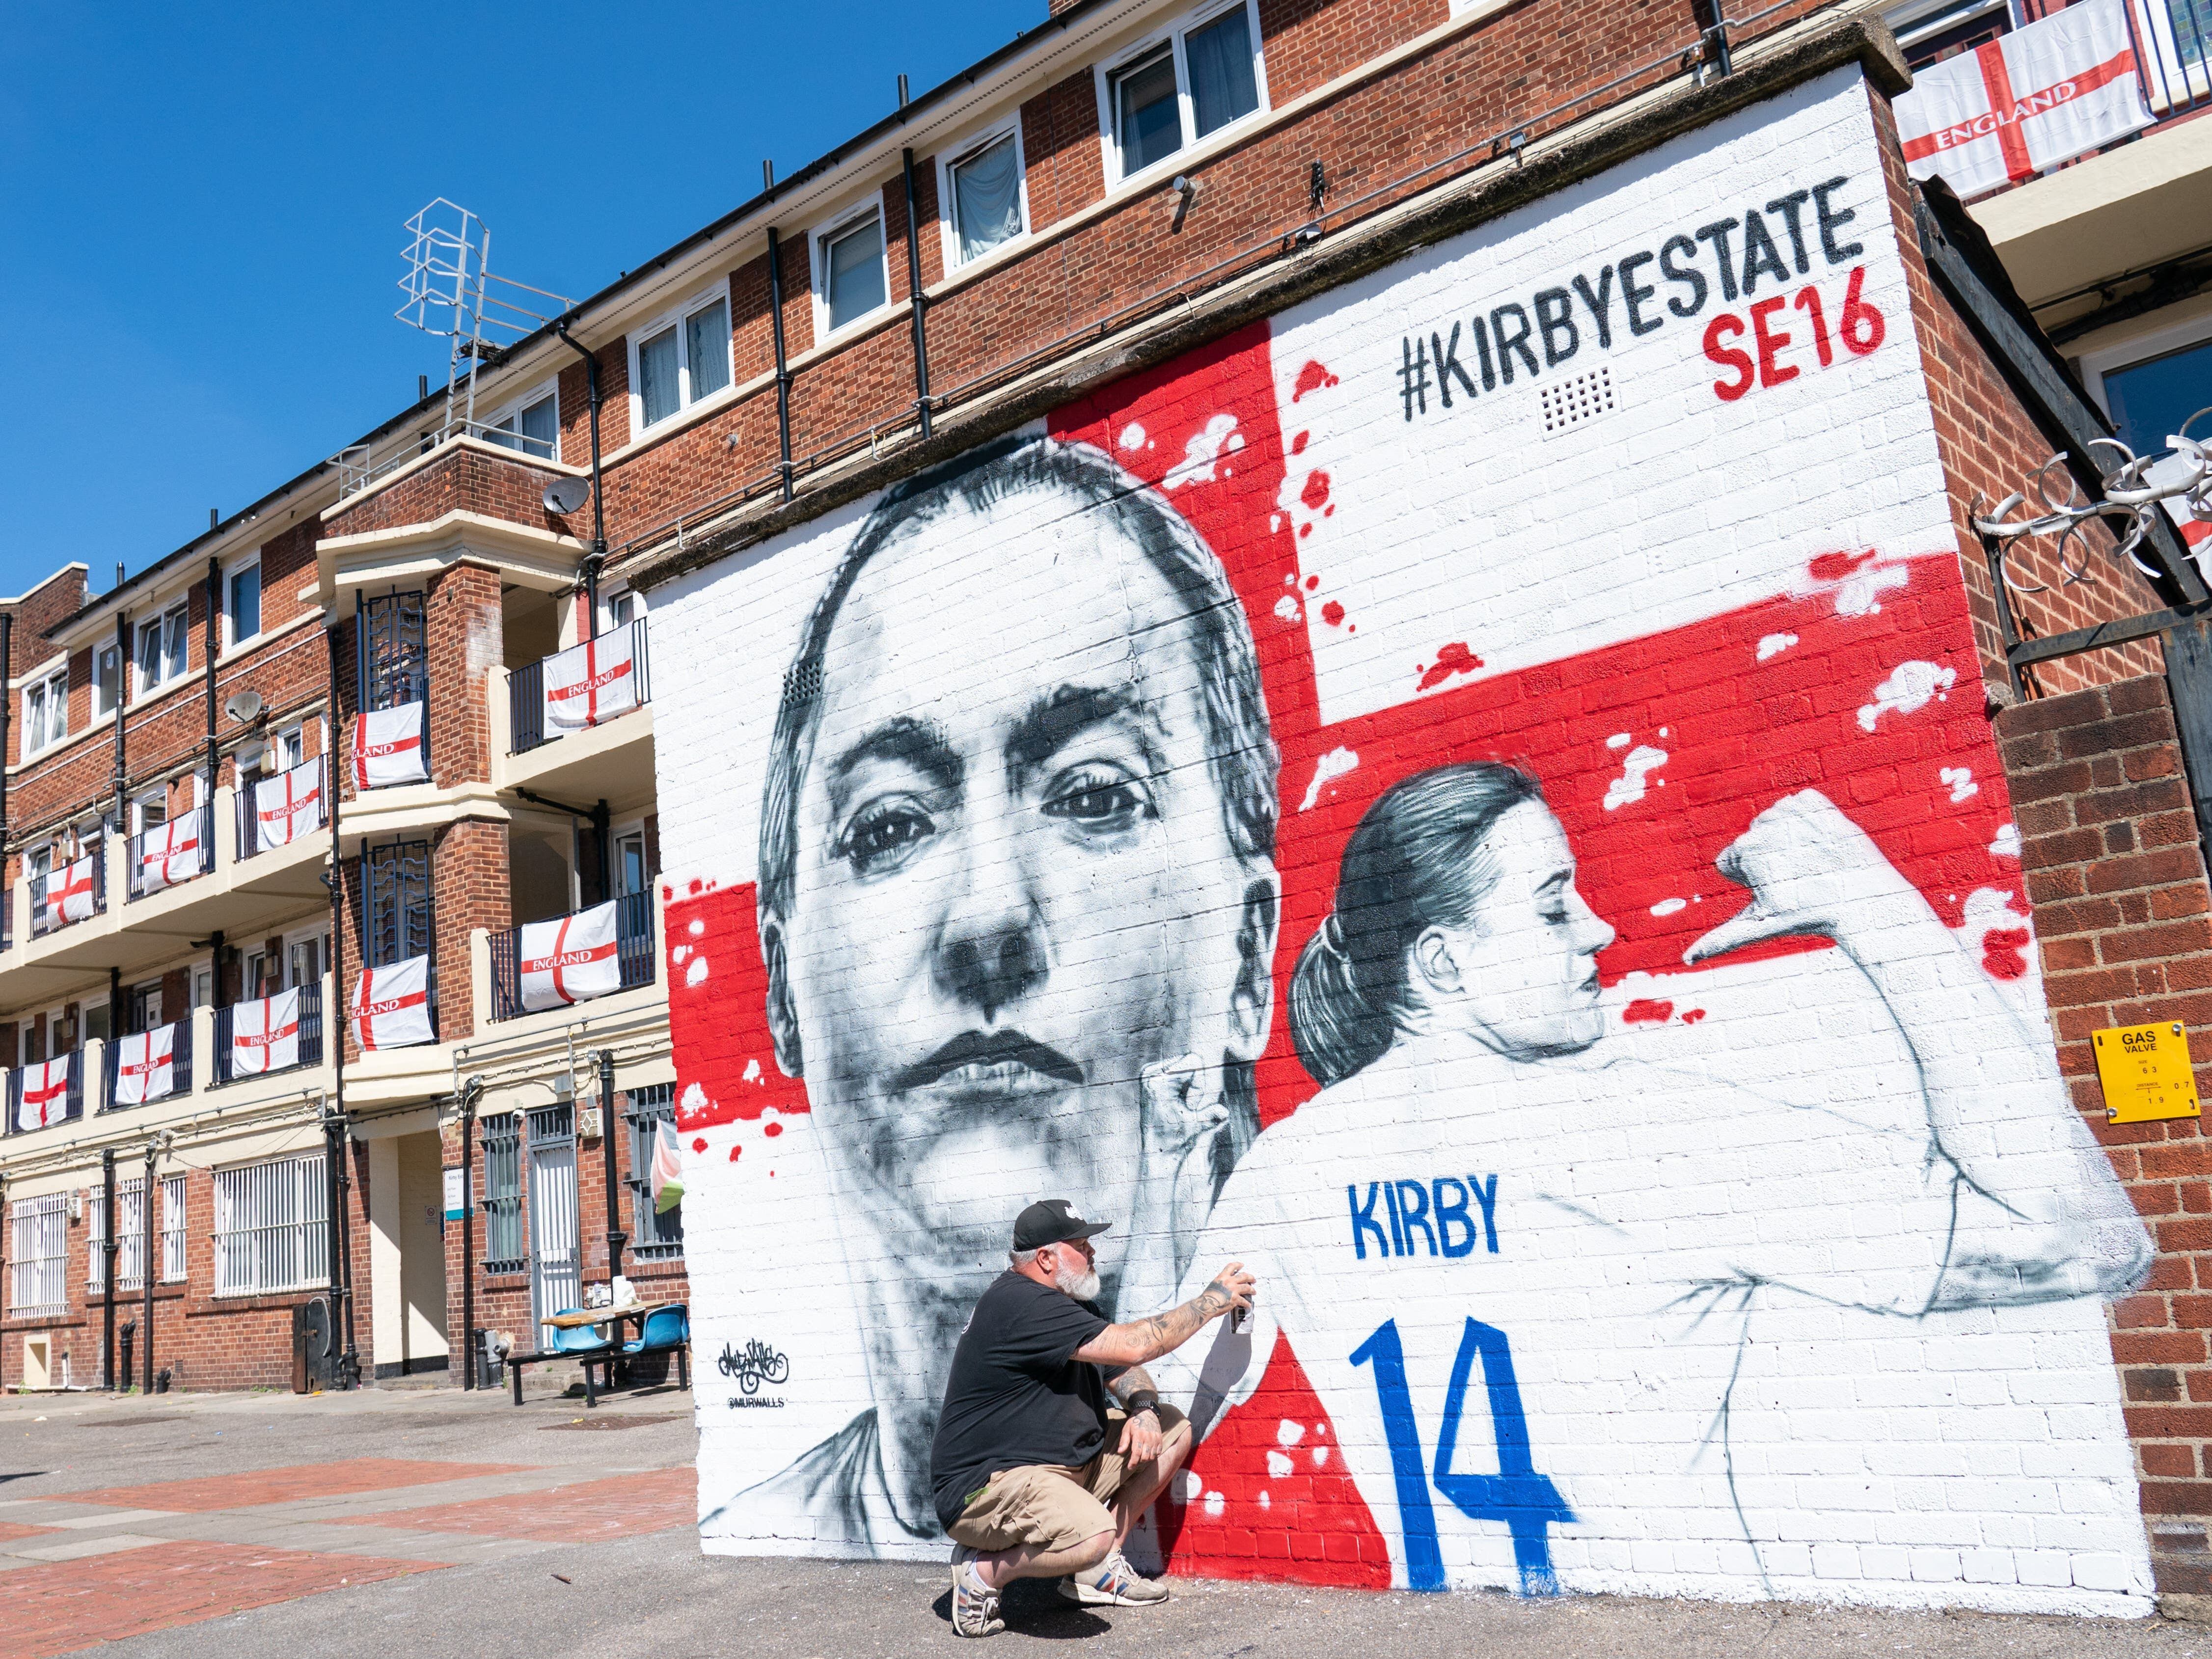 Lionesses star Fran Kirby gets mural – Monday’s sporting social